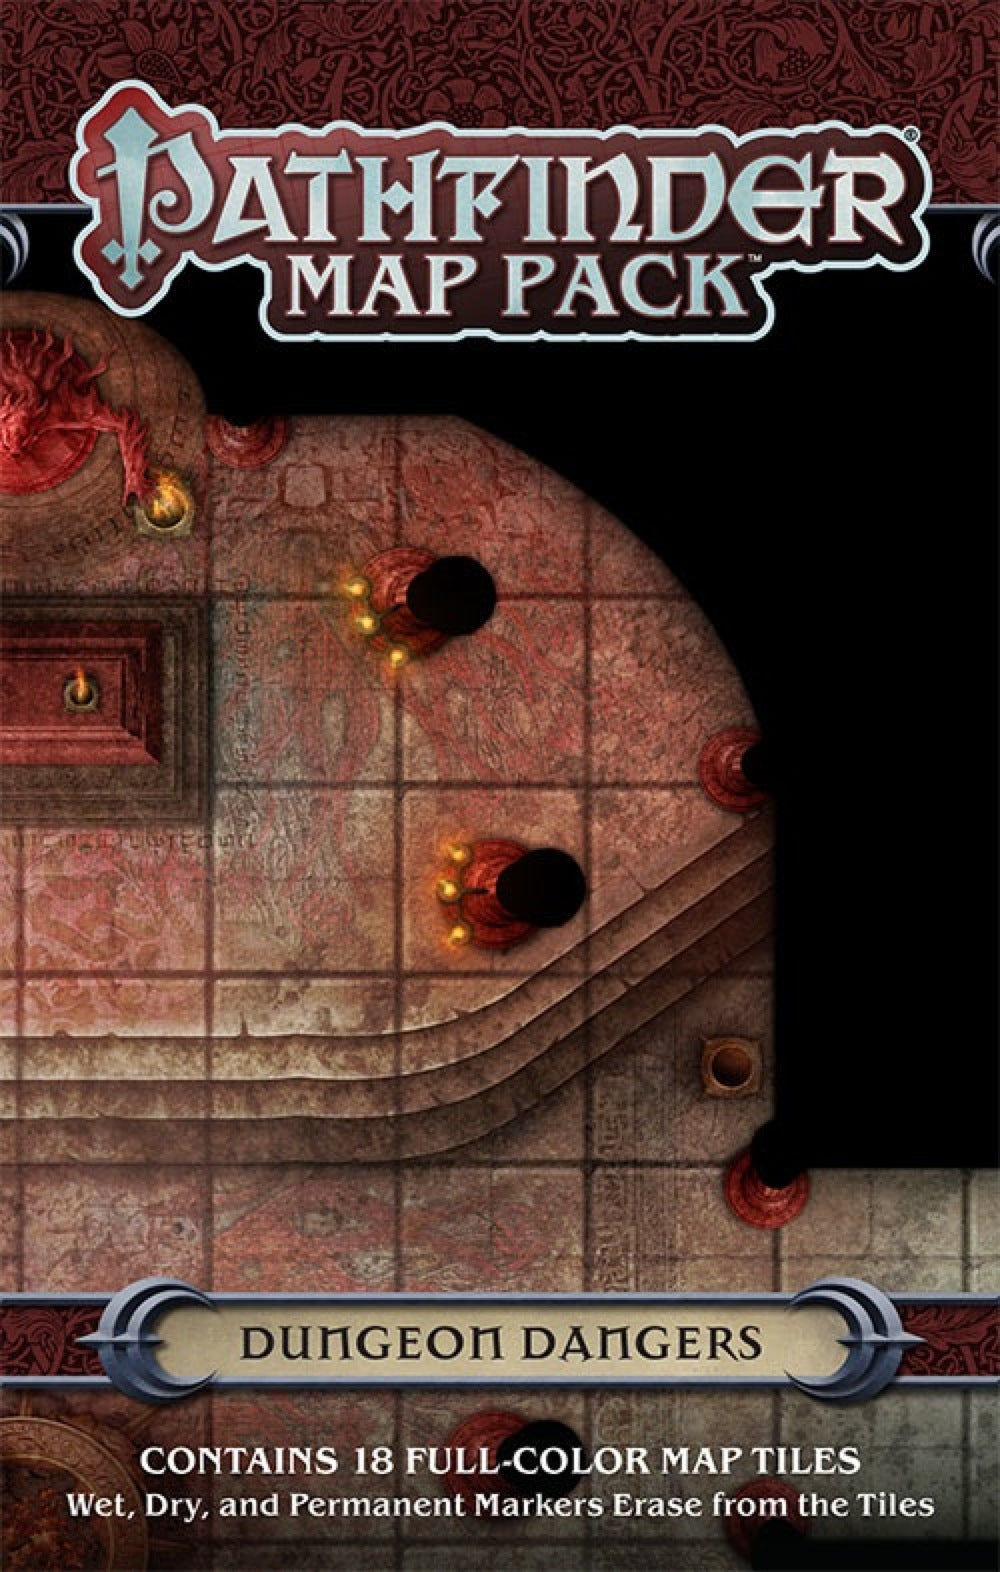 Map Pack: Dungeon Dangers